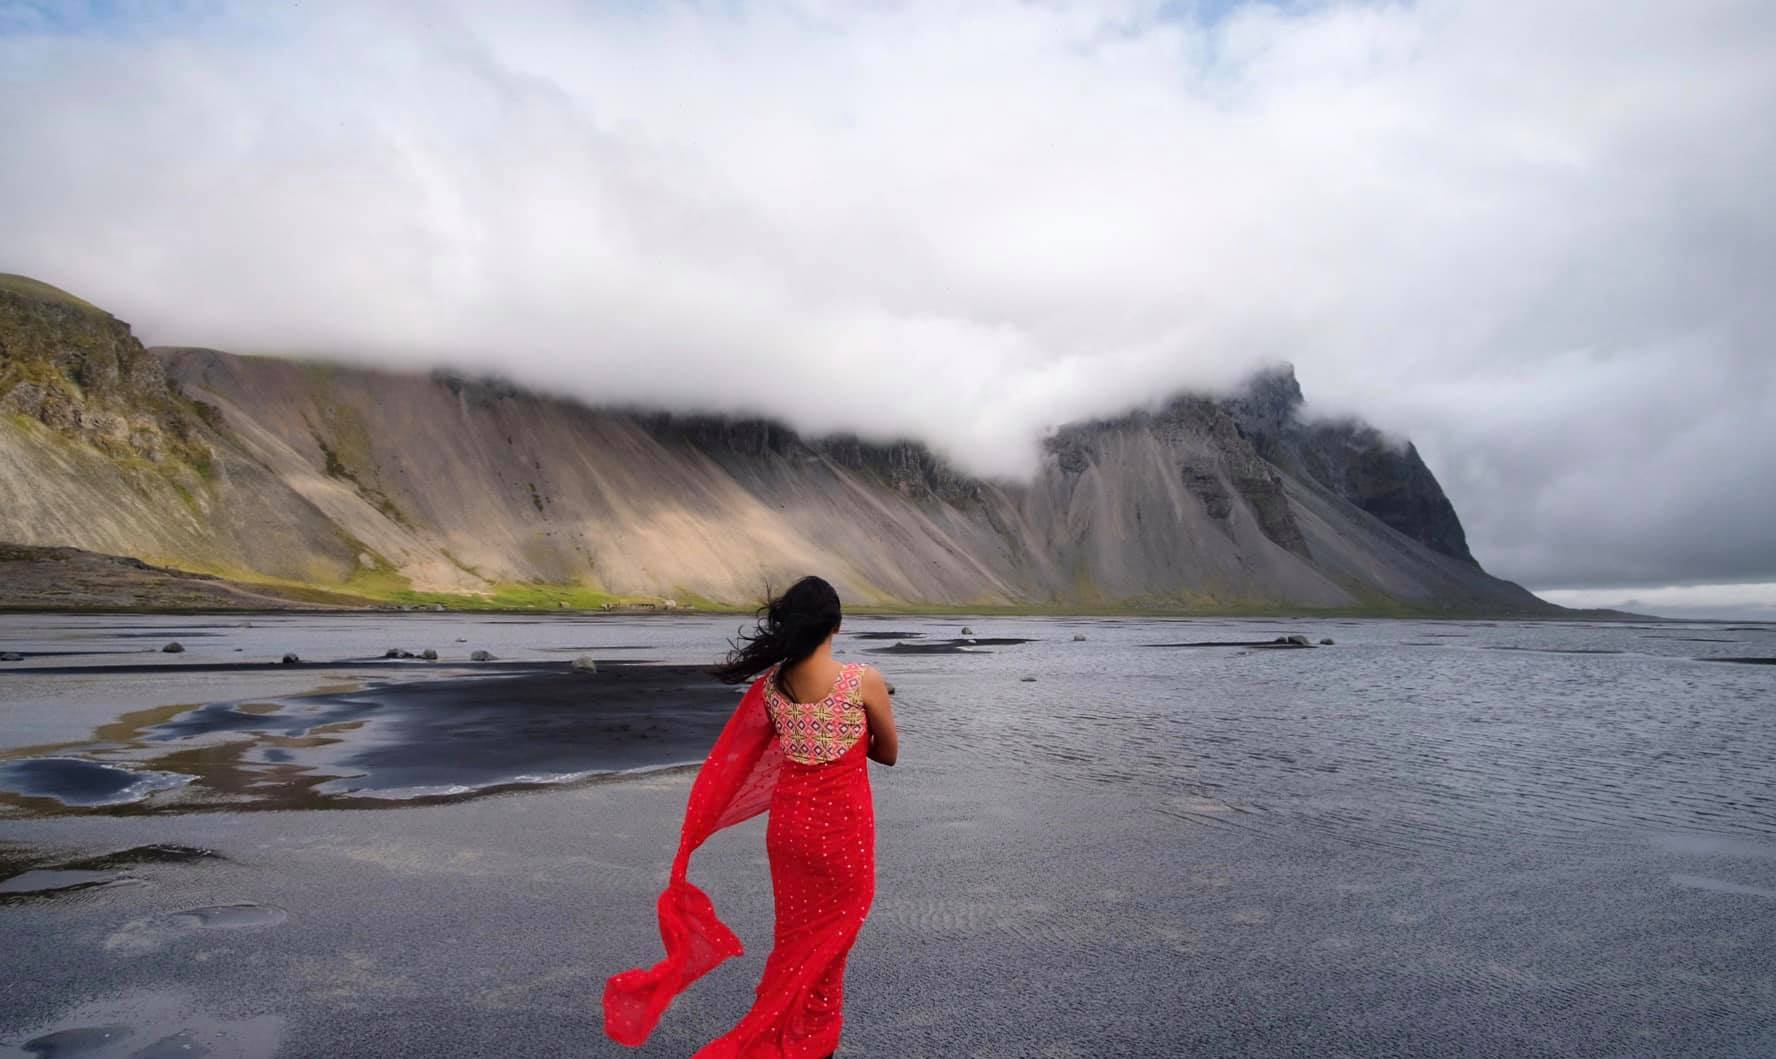 Maitraye is wearing a red saree and admiring the beauty of the Vestrahorn mountain in Iceland